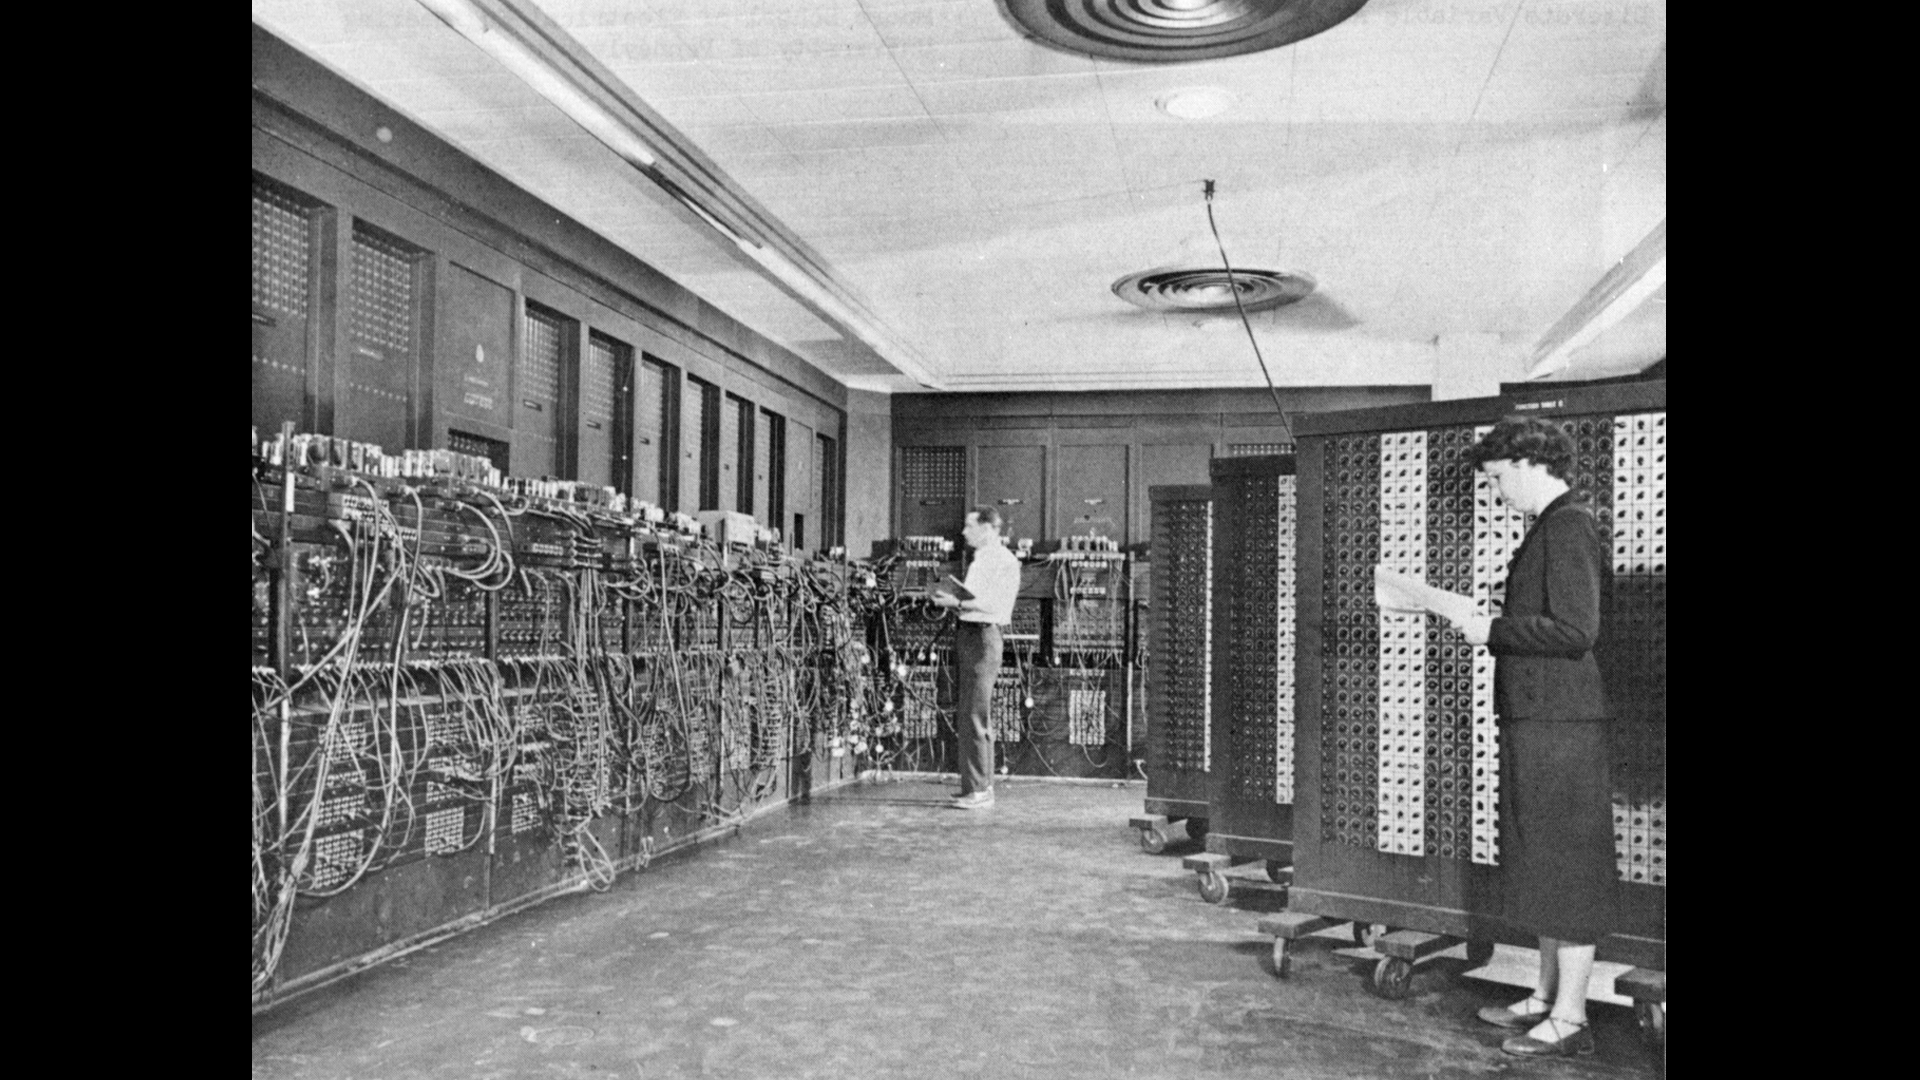 Glen Beck (background) and Betty Snyder (foreground) program ENIAC in BRL building 328. (U.S. Army photo, ca. 1947-1955)